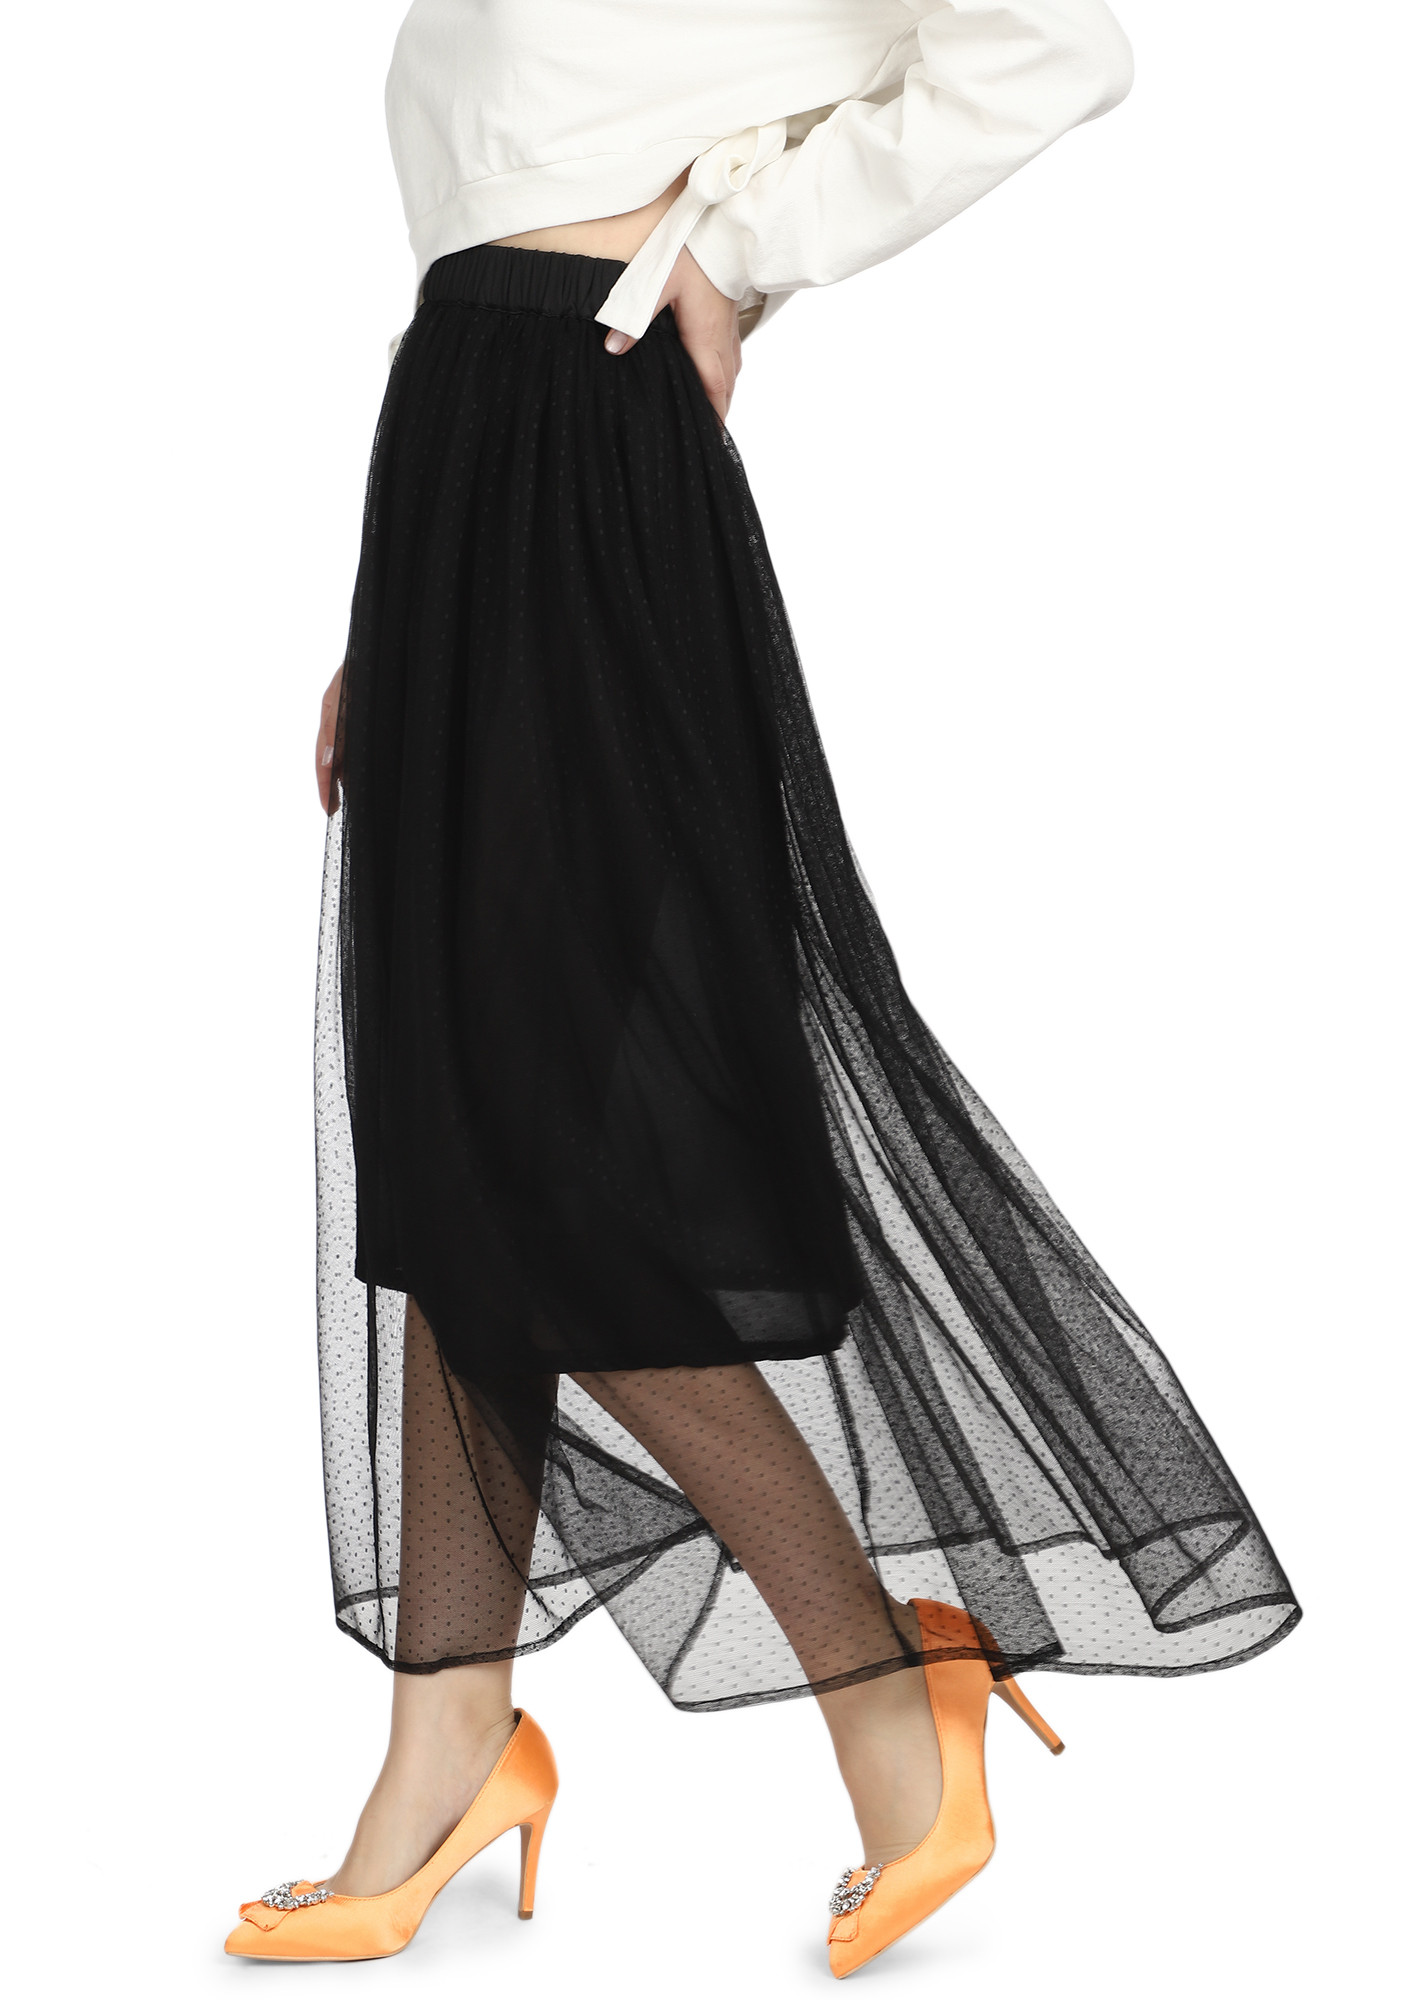 FLOWING WITH THE WIND BLACK MAXI DRESS